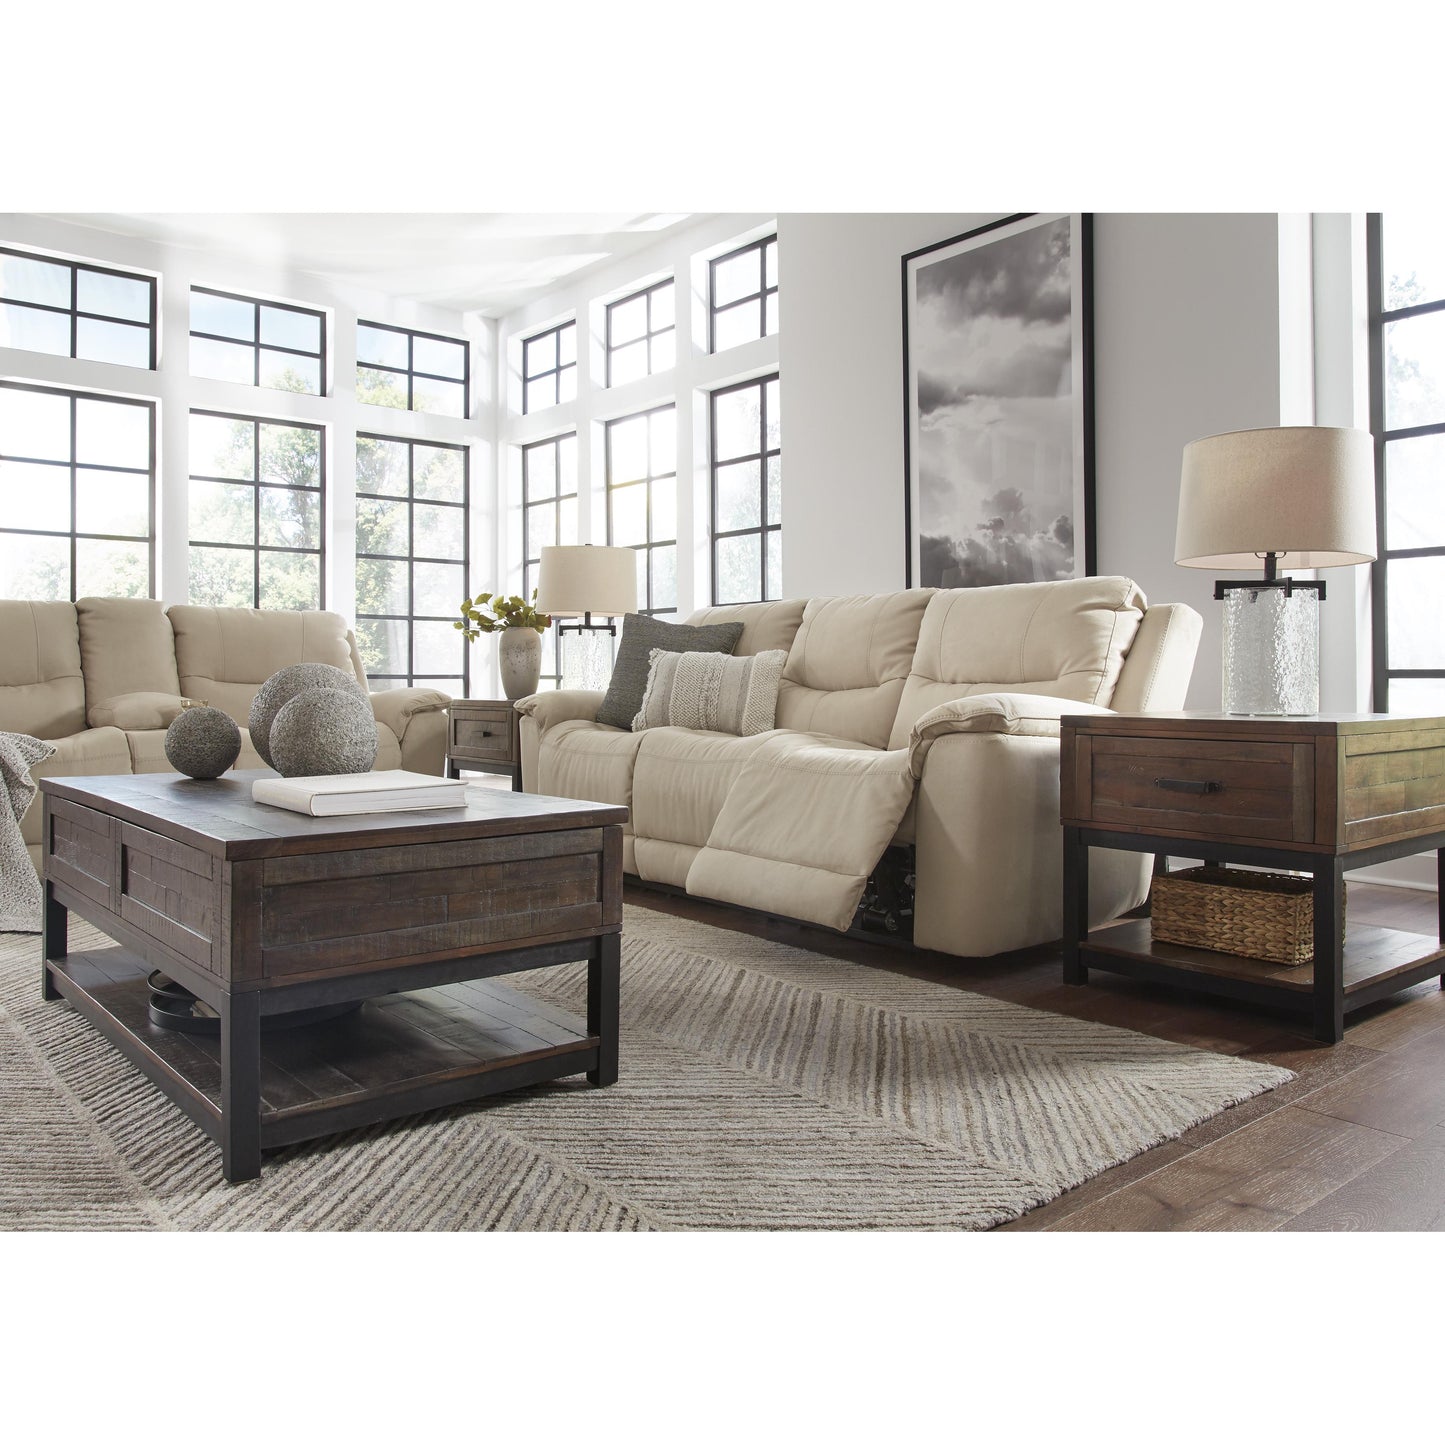 Signature Design by Ashley Next-Gen Gaucho Power Reclining Leather Look Loveseat 6080718 IMAGE 9